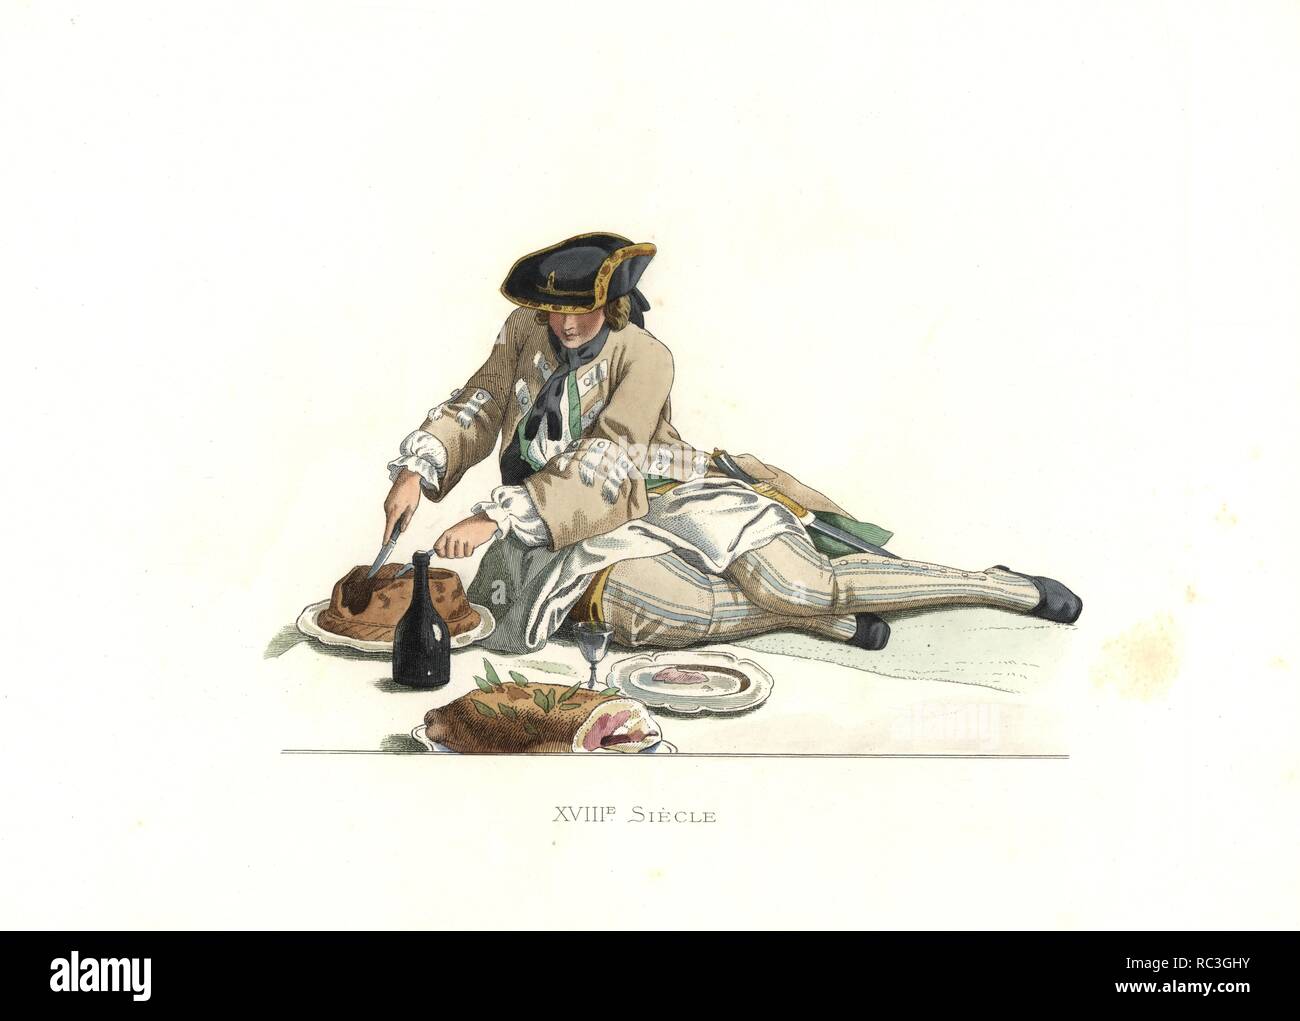 Gentleman in hunting clothes, France, 18th century, from a painting by Carle Vanloo. Handcolored illustration by E. Lechevallier-Chevignard, lithographed by A. Didier, L. Flameng, F. Laguillermie, from Georges Duplessis's 'Costumes historiques des XVIe, XVIIe et XVIIIe siecles' (Historical costumes of the 16th, 17th and 18th centuries), Paris 1867. The book was a continuation of the series on the costumes of the 12th to 15th centuries published by Camille Bonnard and Paul Mercuri from 1830. Georges Duplessis (1834-1899) was curator of the Prints department at the Bibliotheque nationale. Edmond Stock Photo